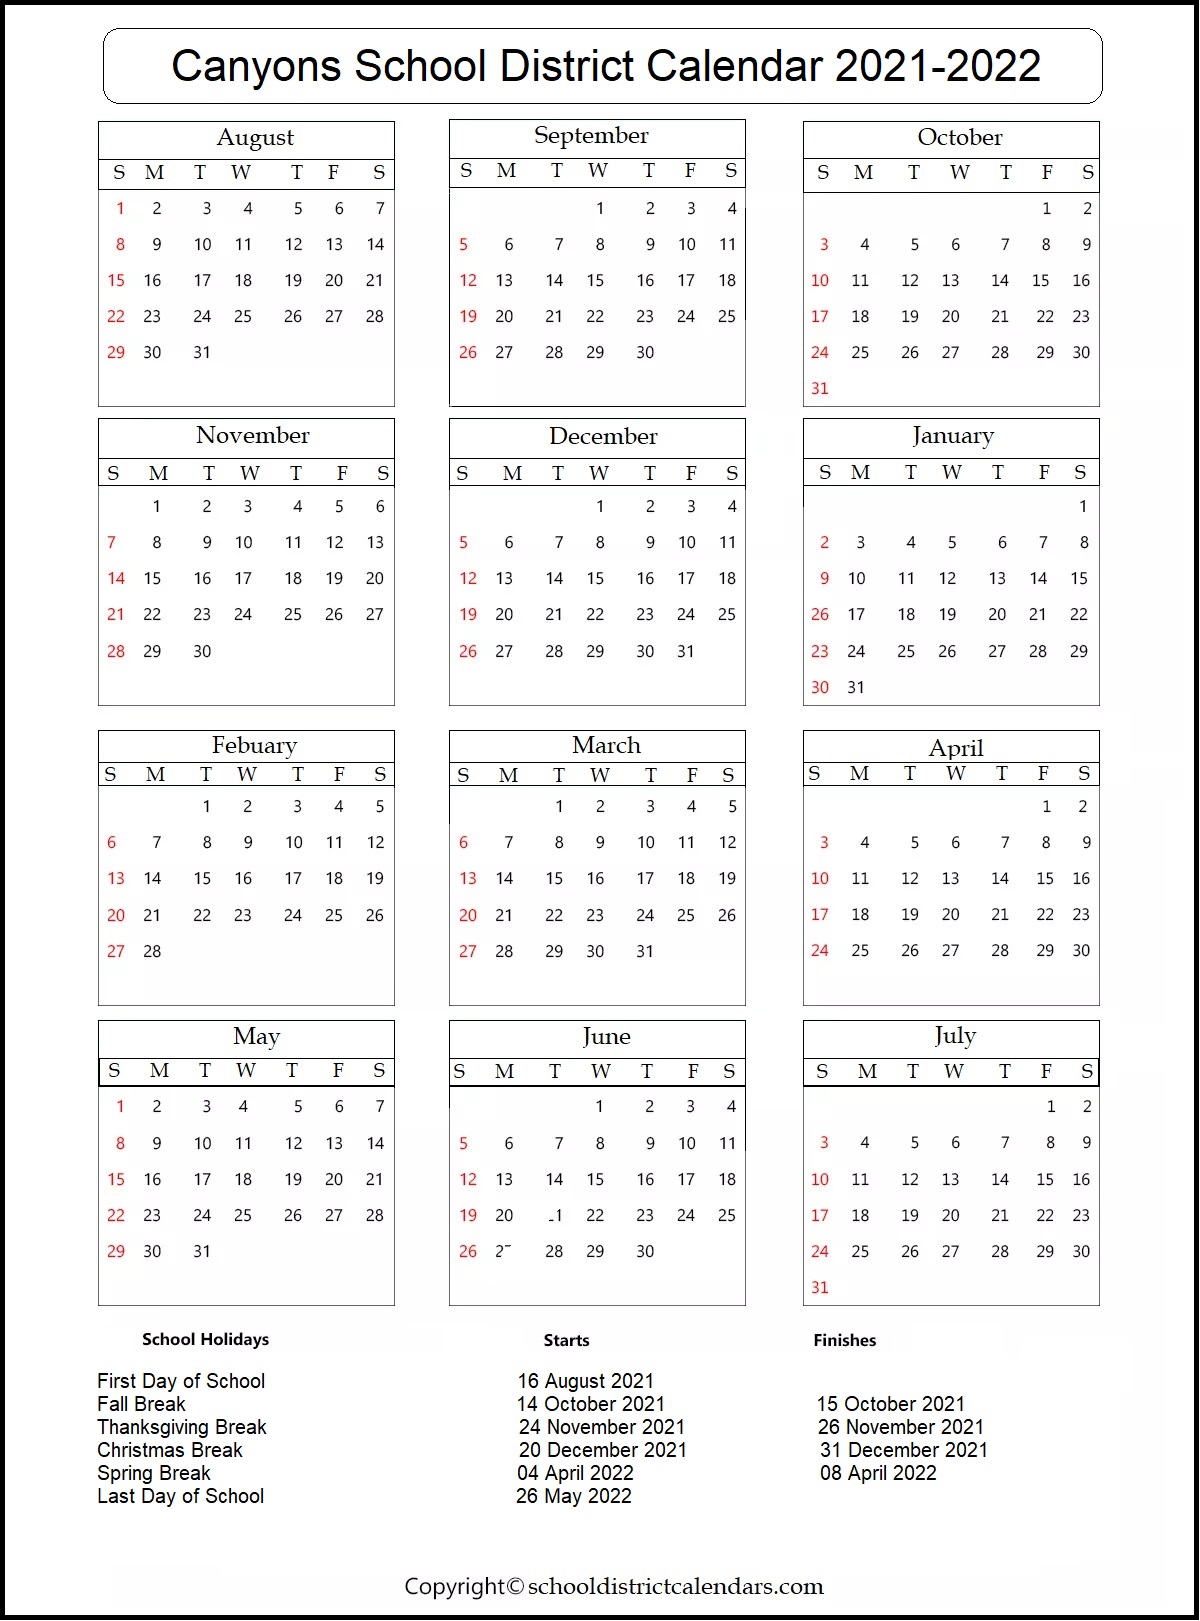 Canyons School District Calendar 20212022 With Holidays School